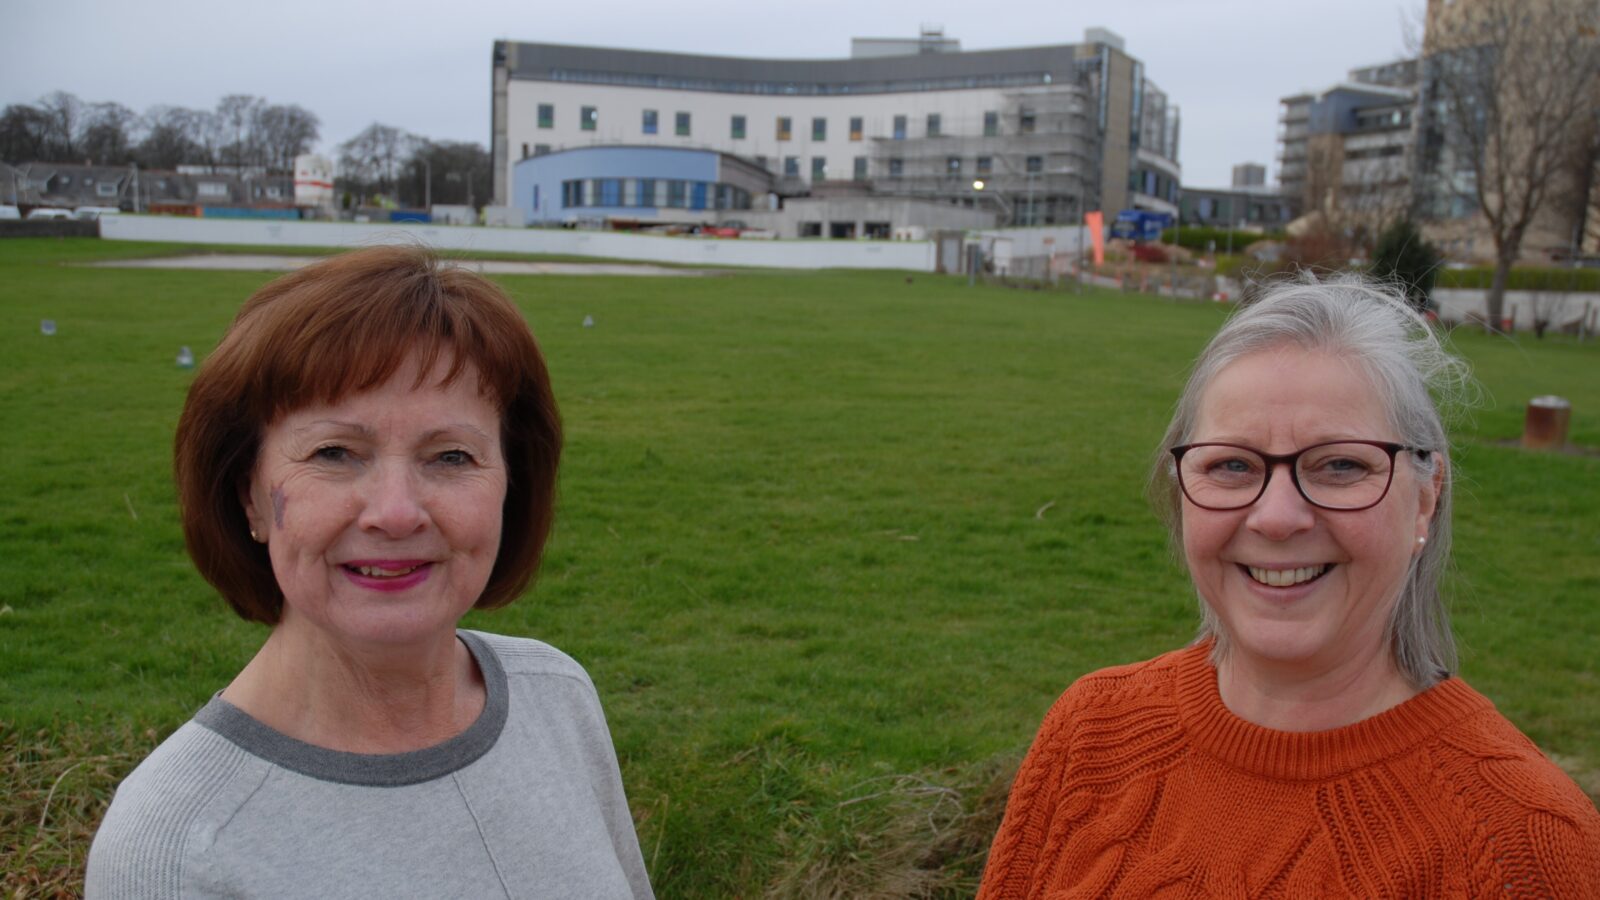 Margaret Meredith, Project Nurse (left) and Jayne Forrest, Project Midwife (right)